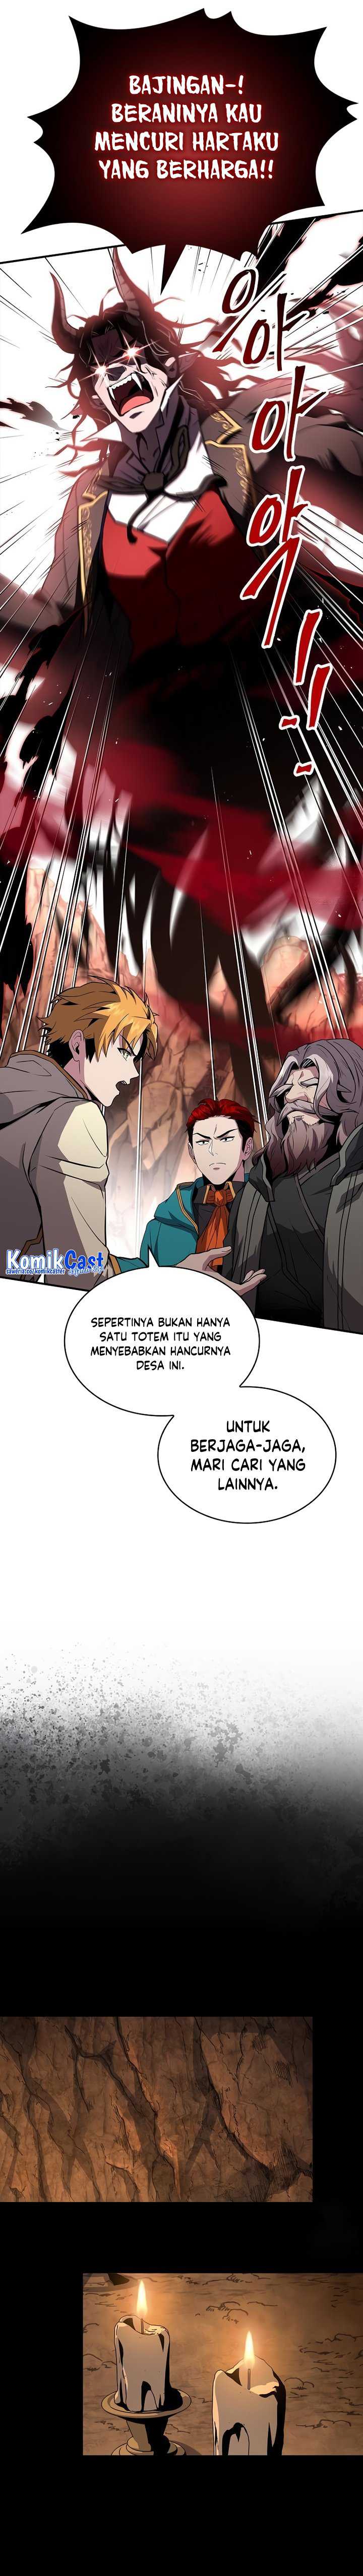 Talent-Swallowing Magician Chapter 52